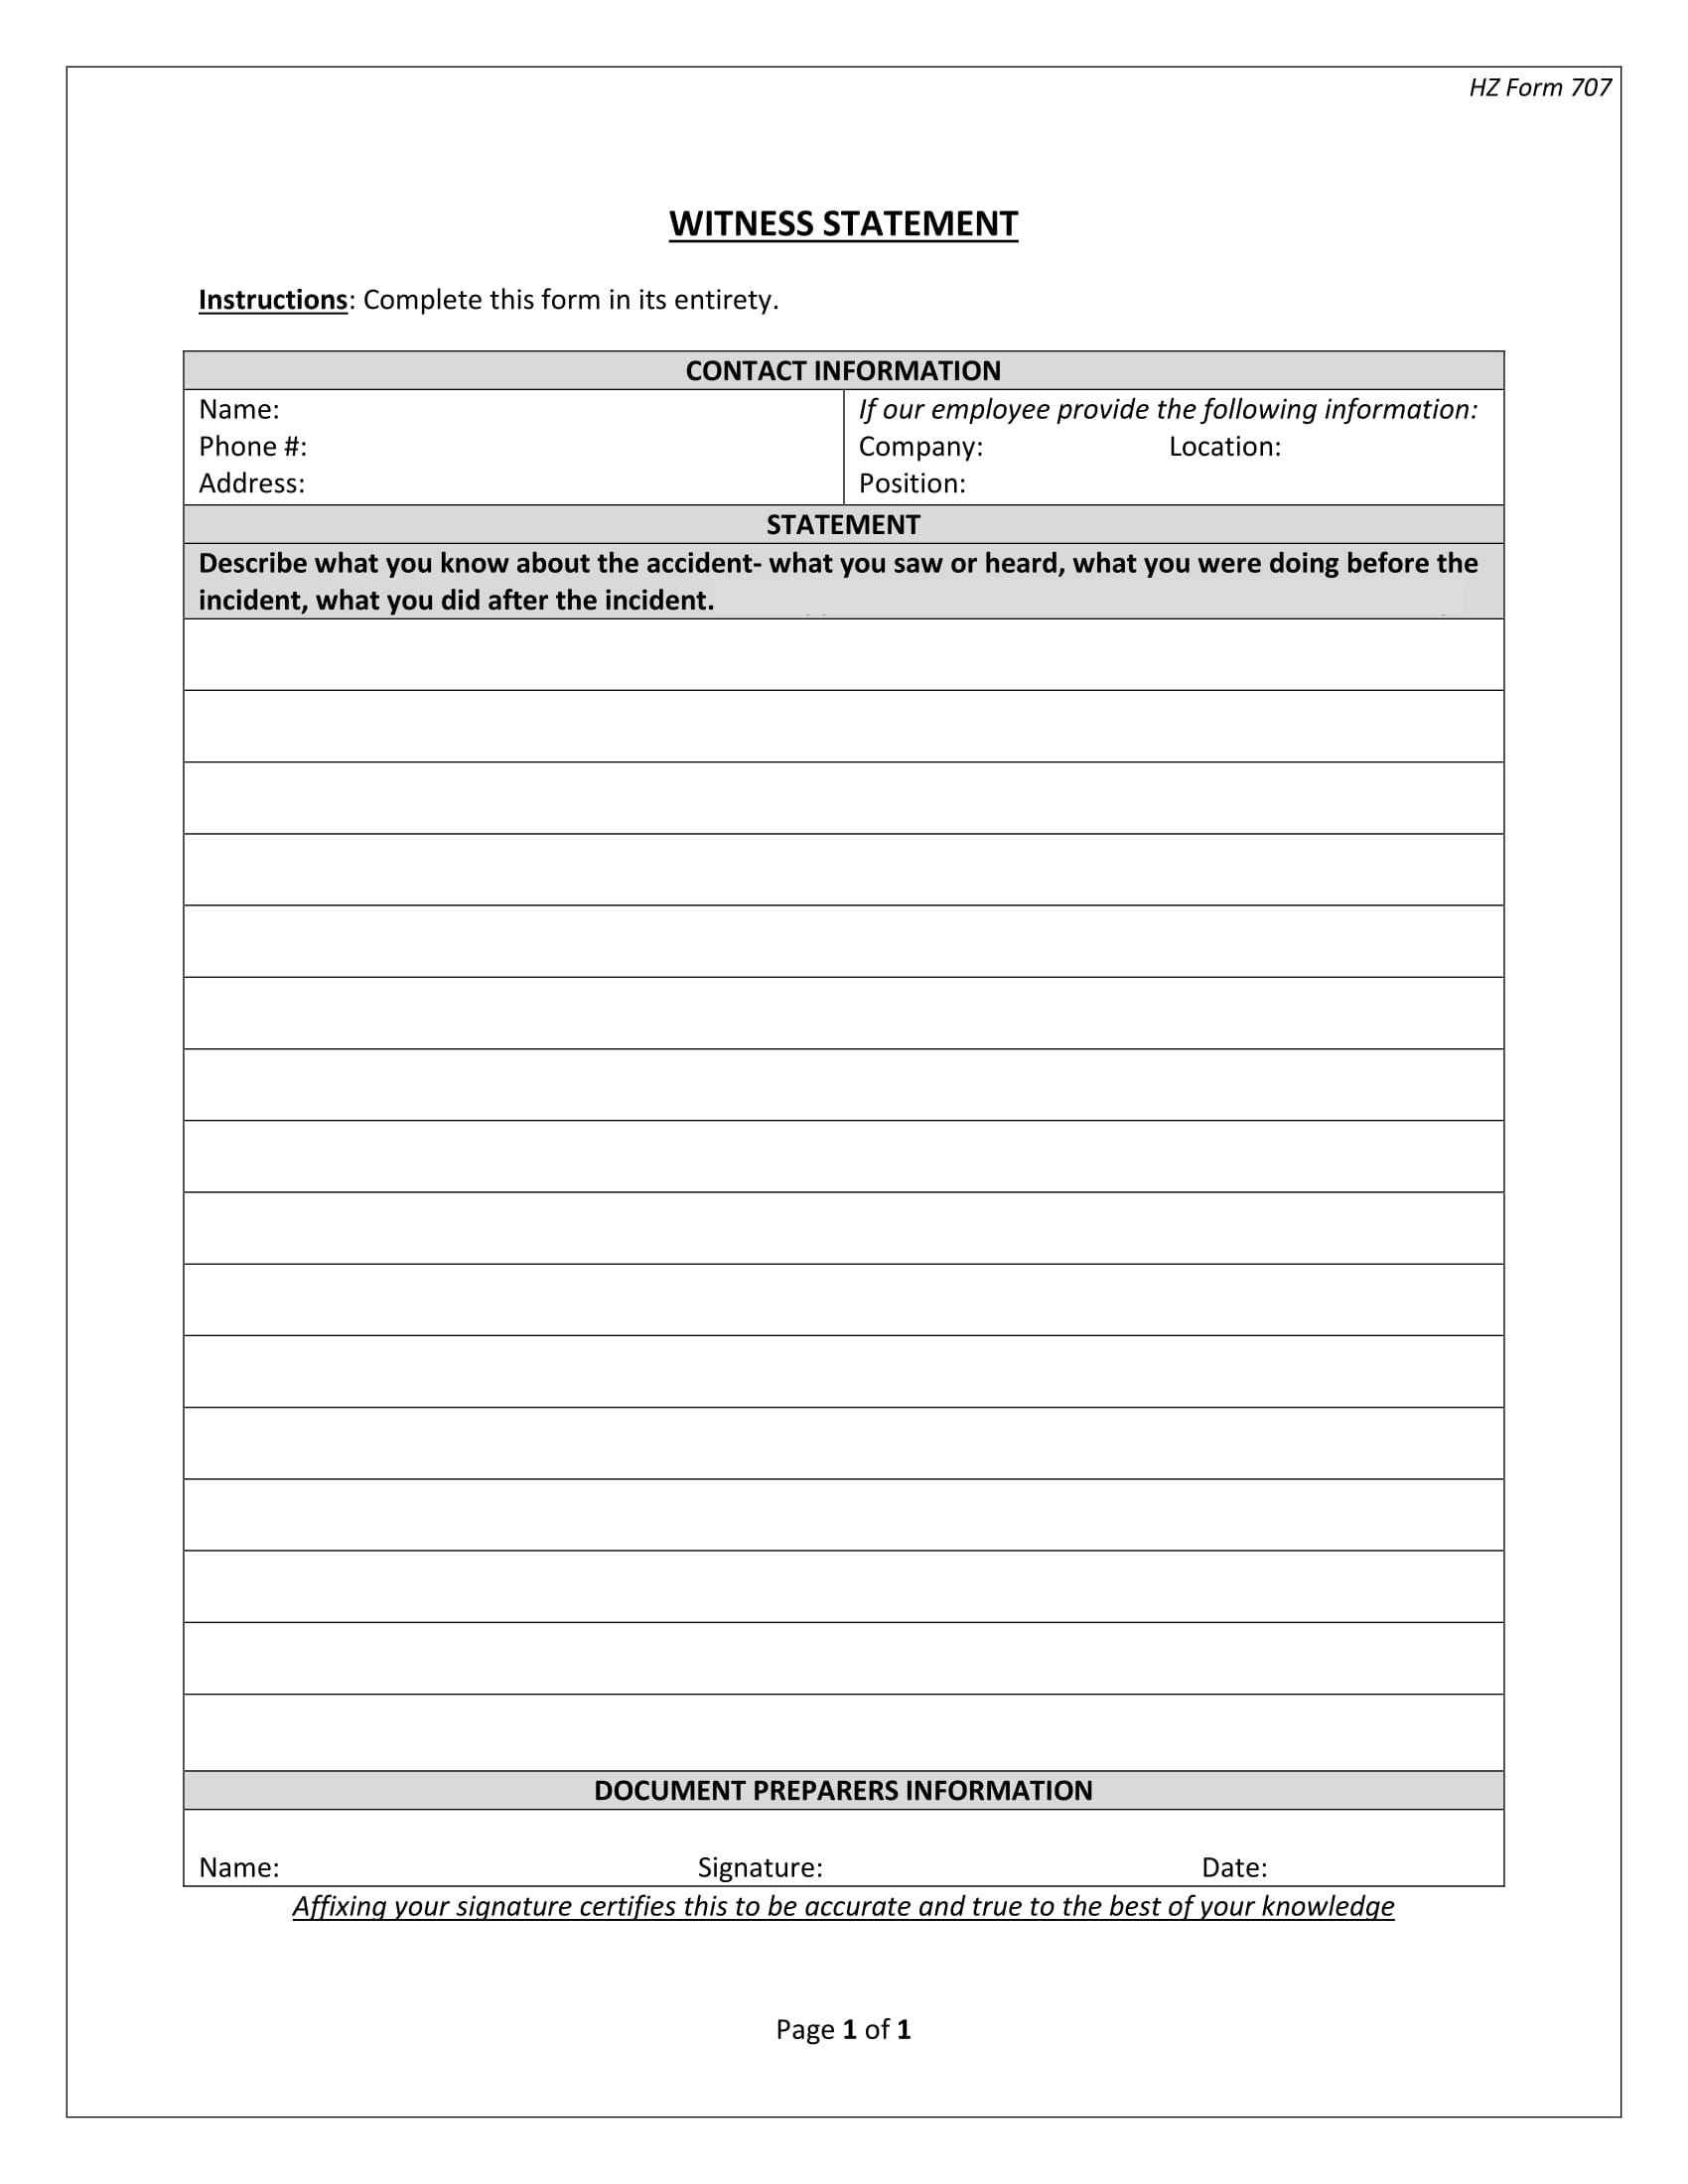 car accident witness statement template